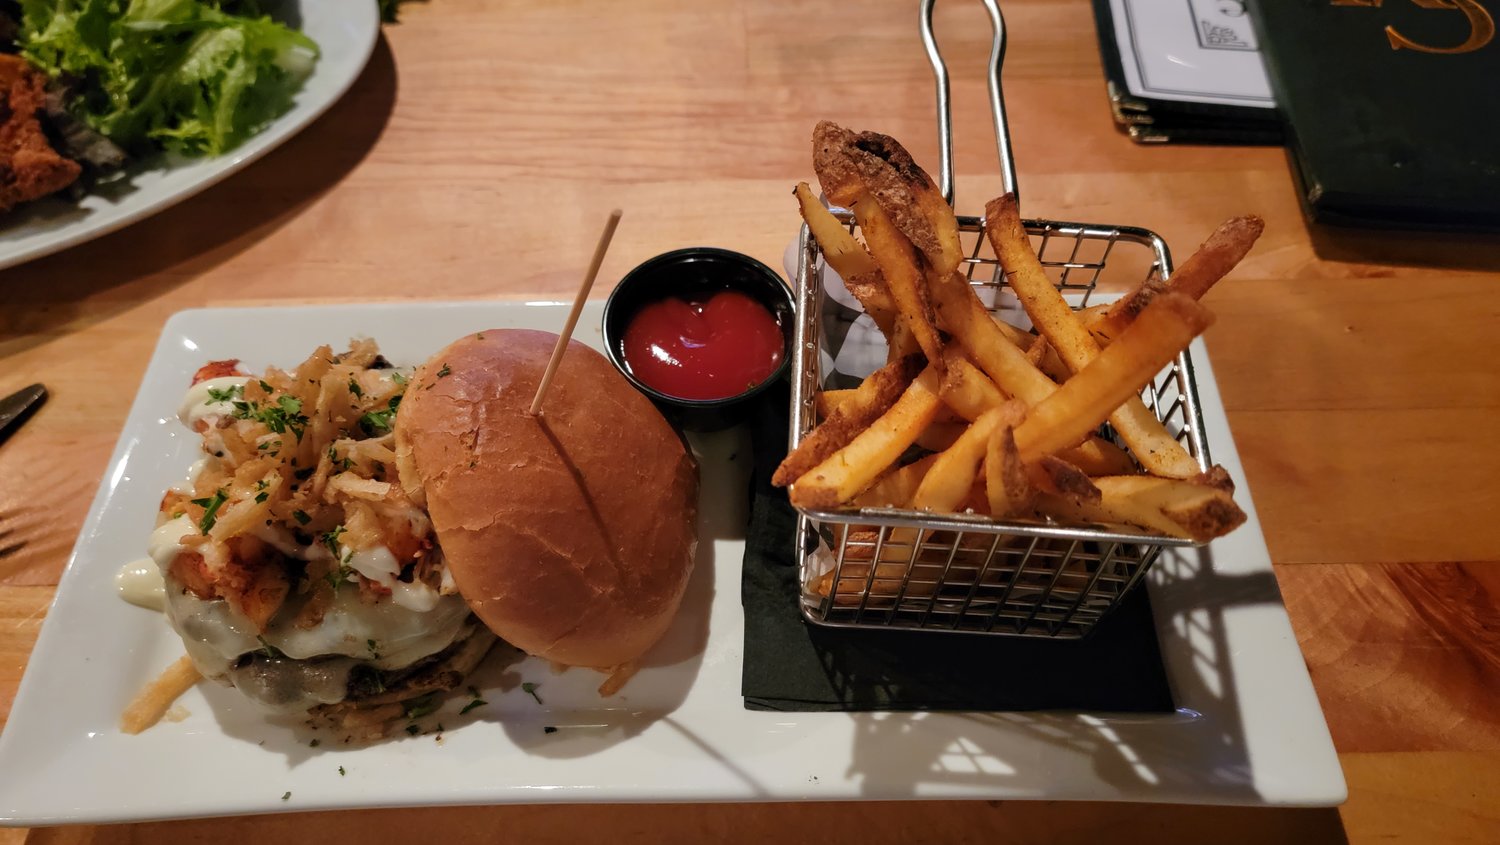 The surf and turf burger is eight ounces of prime beef topped with lobster, Swiss cheese, onion straws and lemon aioli.